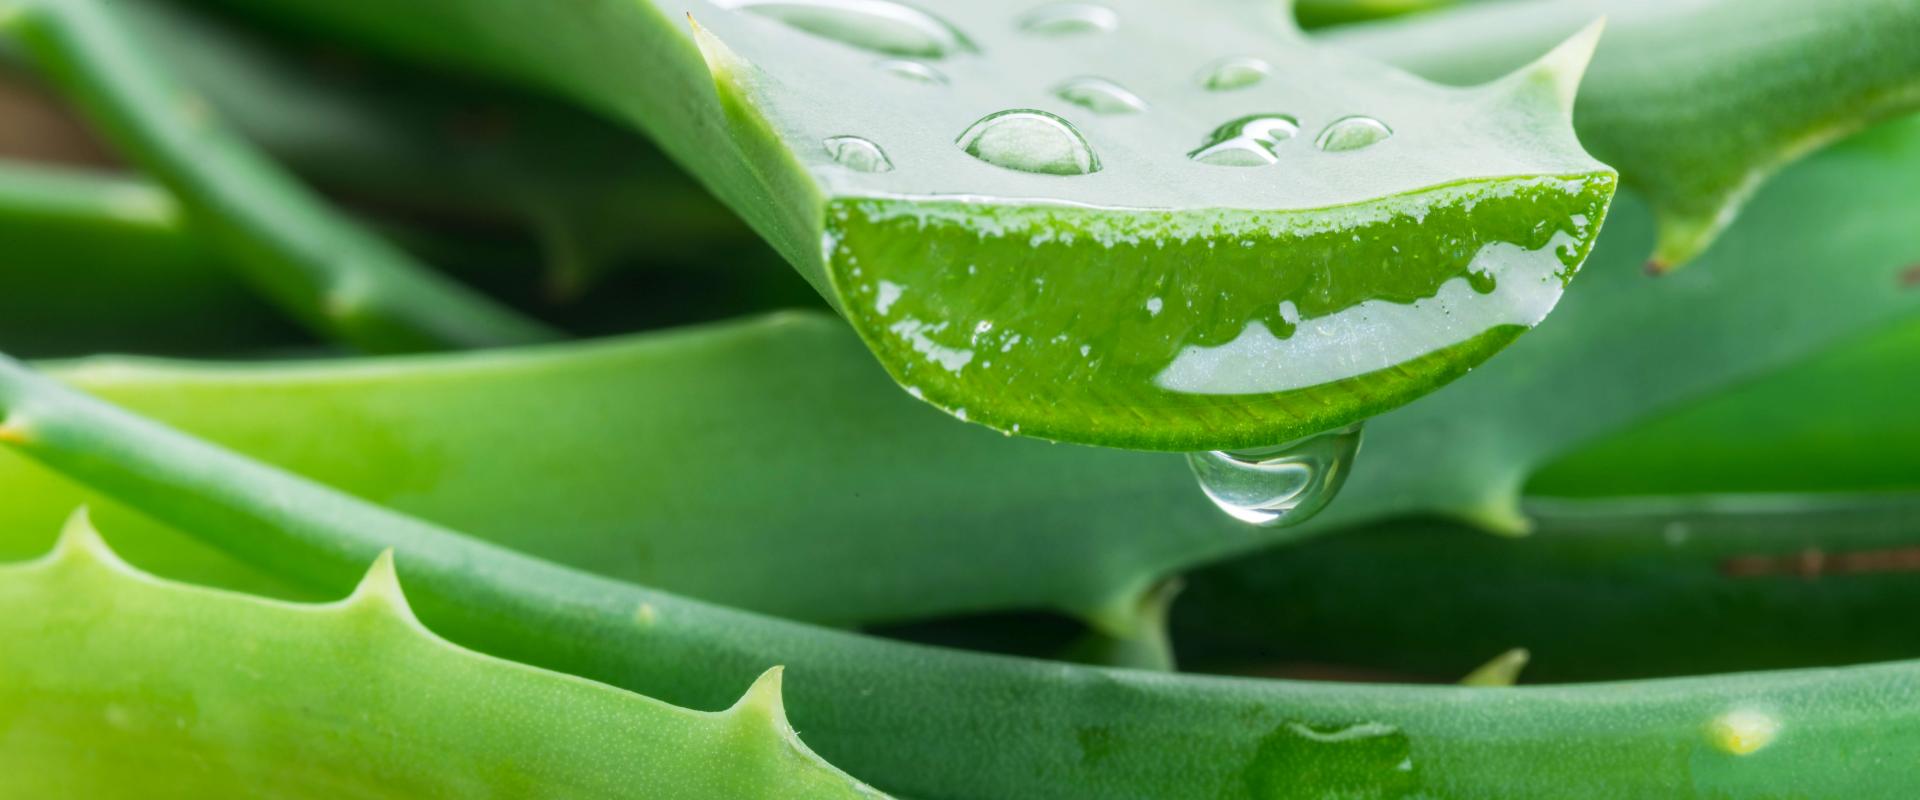 What are some benefits of applying Aloe vera? 1